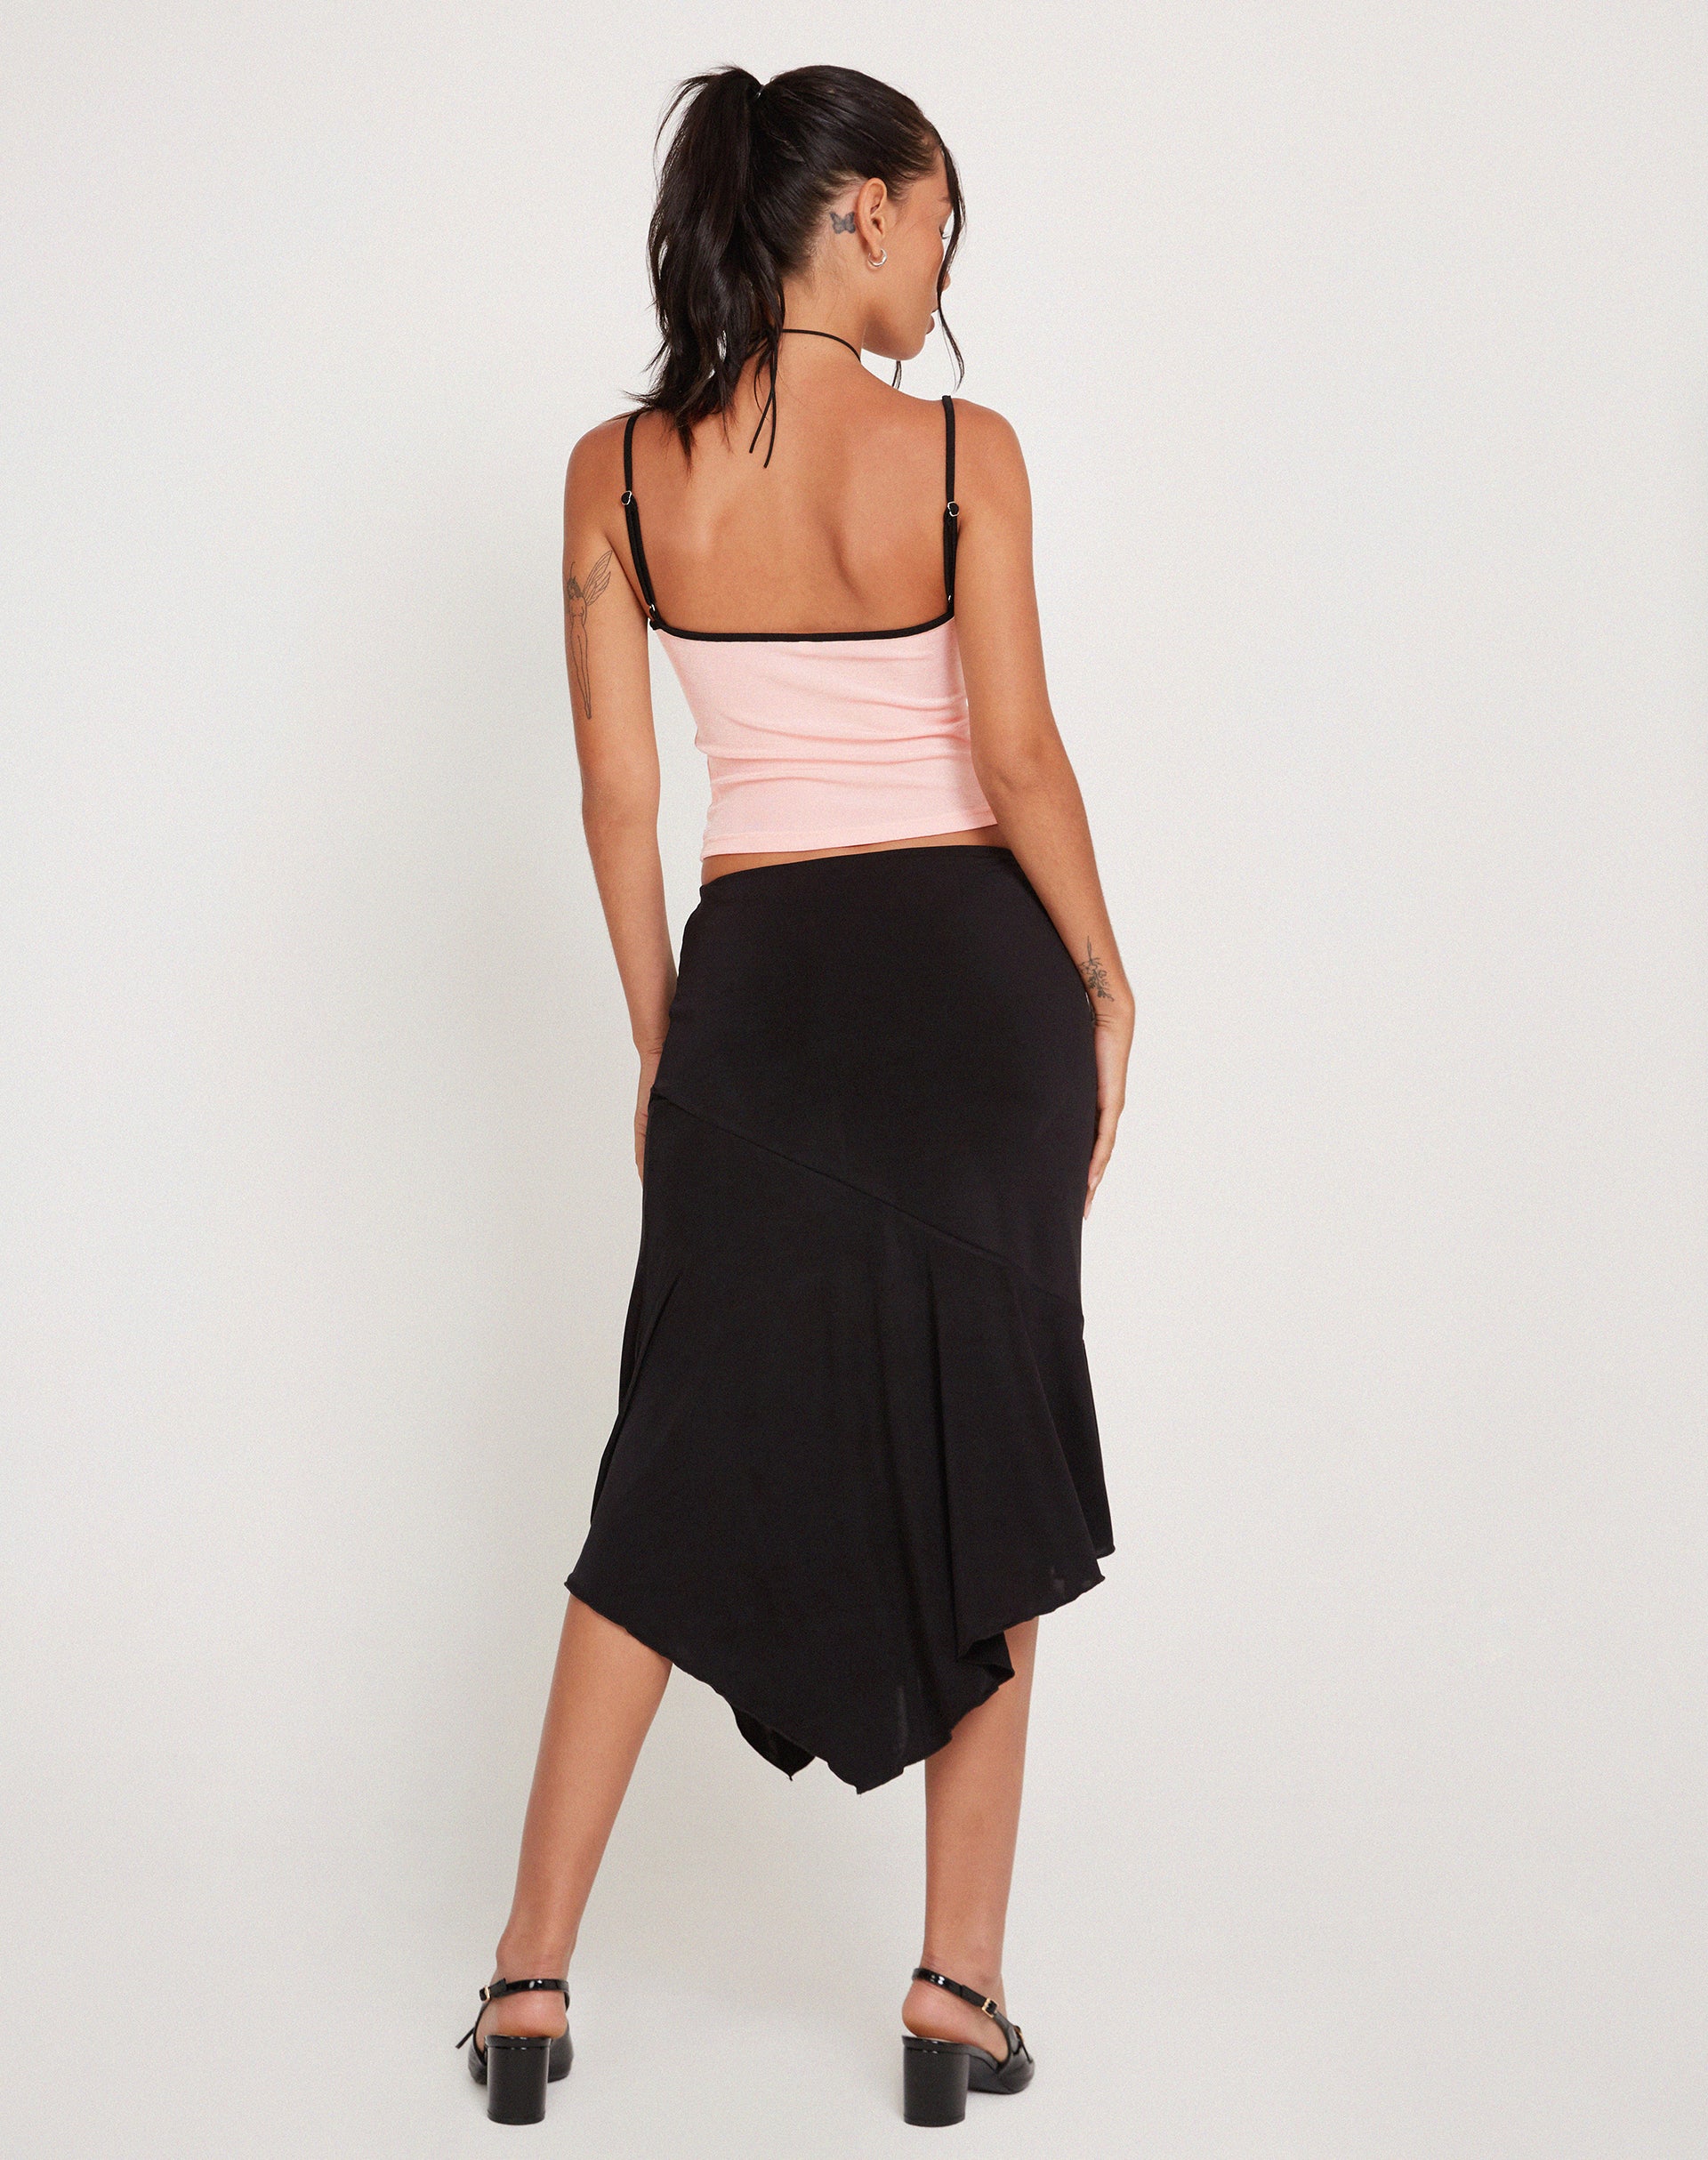 Image of Talasi Crop Top in Pale Pink with Black Binding